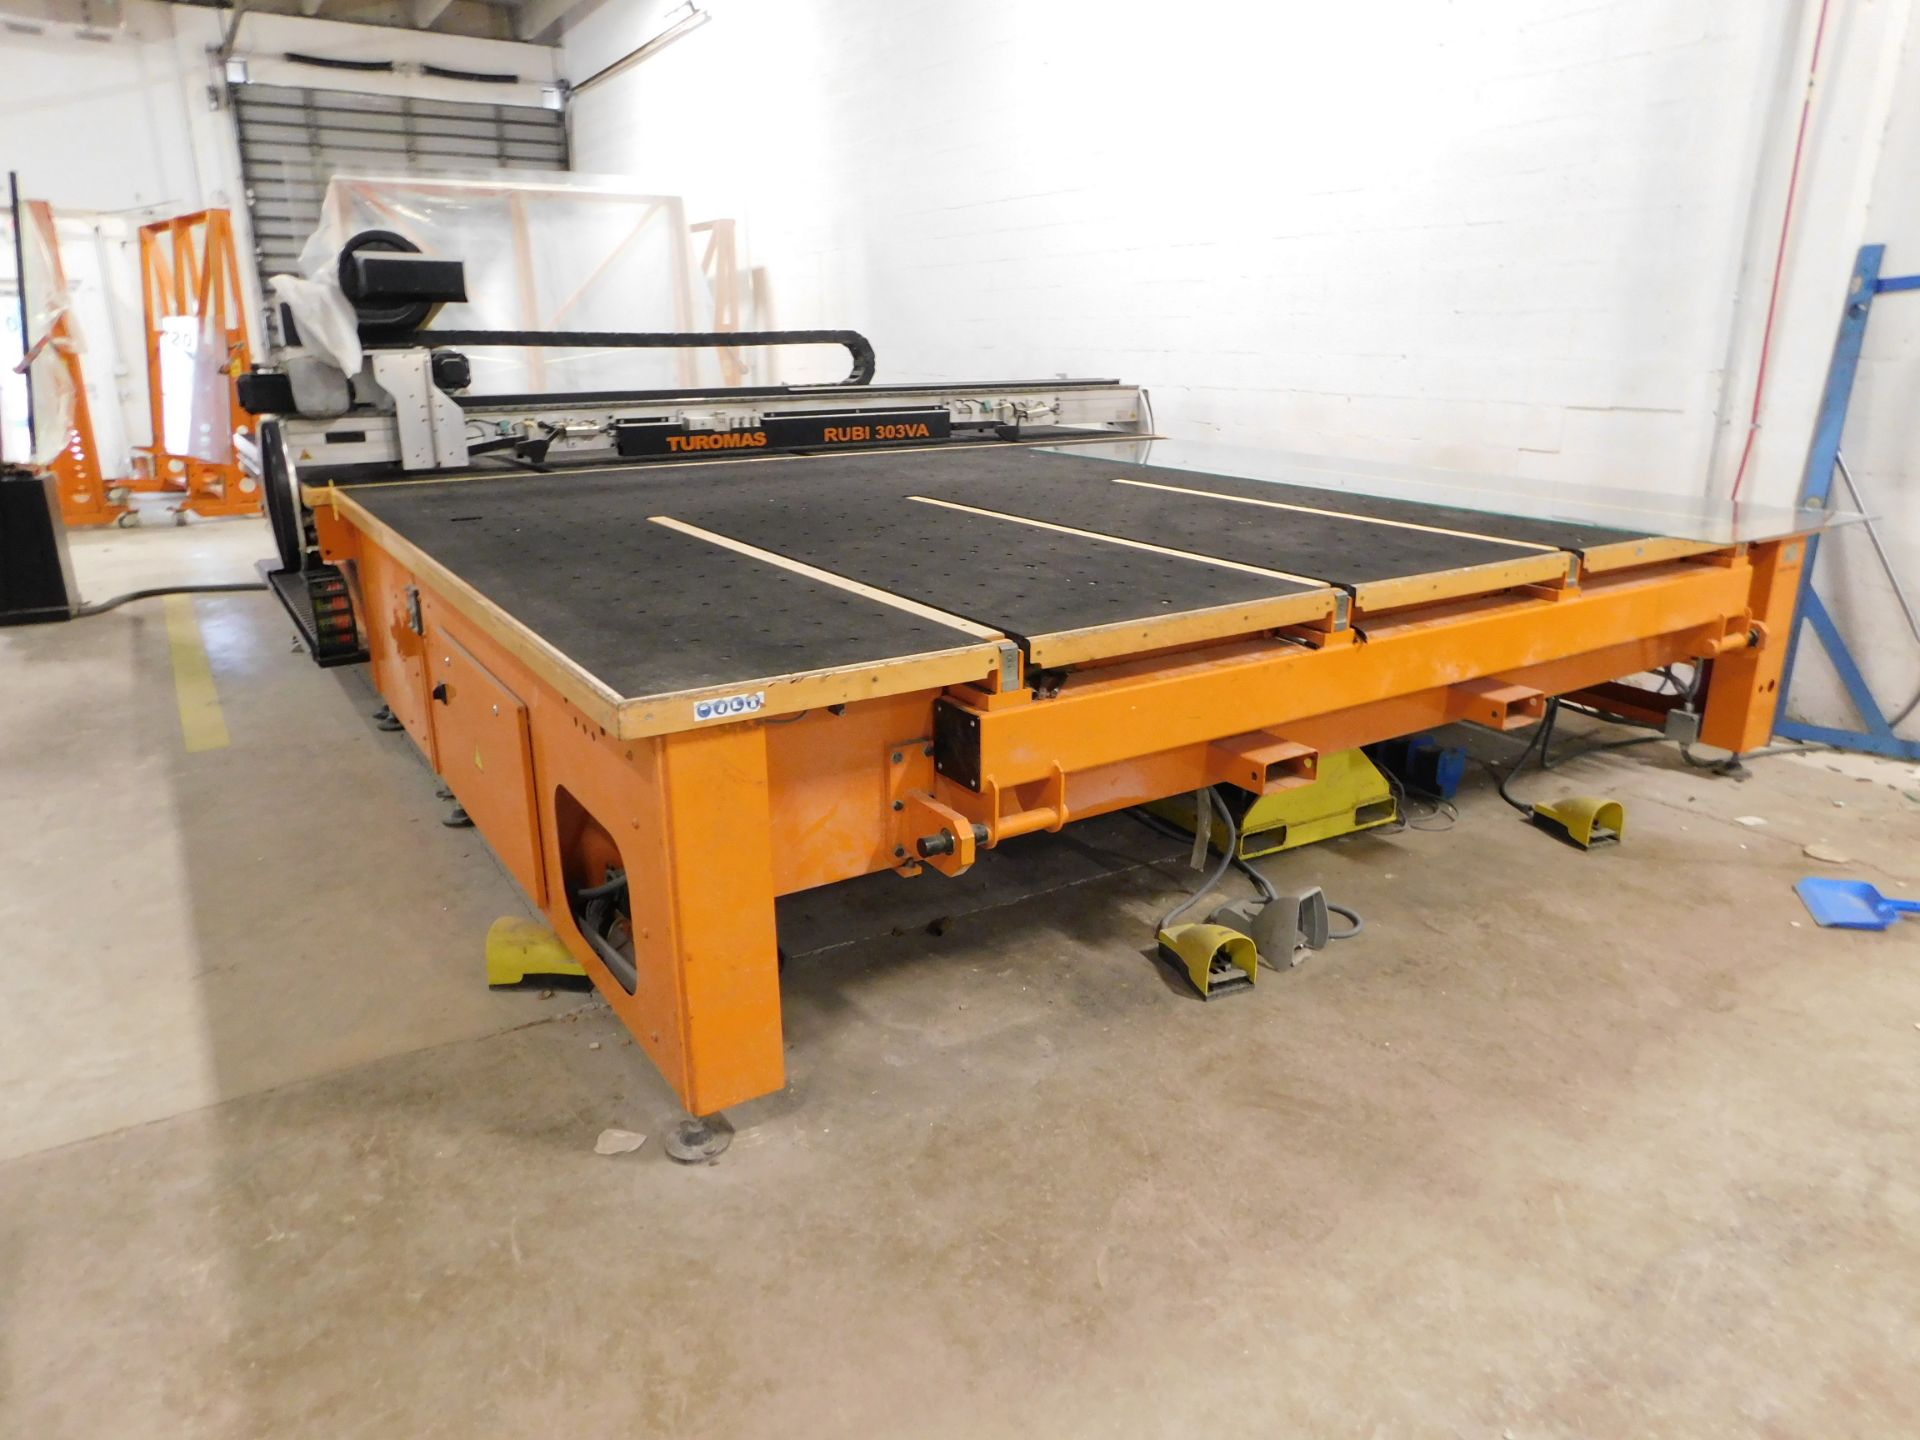 2019 Turomas Model RUBI 303VA Float Glass CNC Cutting Table, s/n MP-1430, 14' x 148", Includes - Image 13 of 13